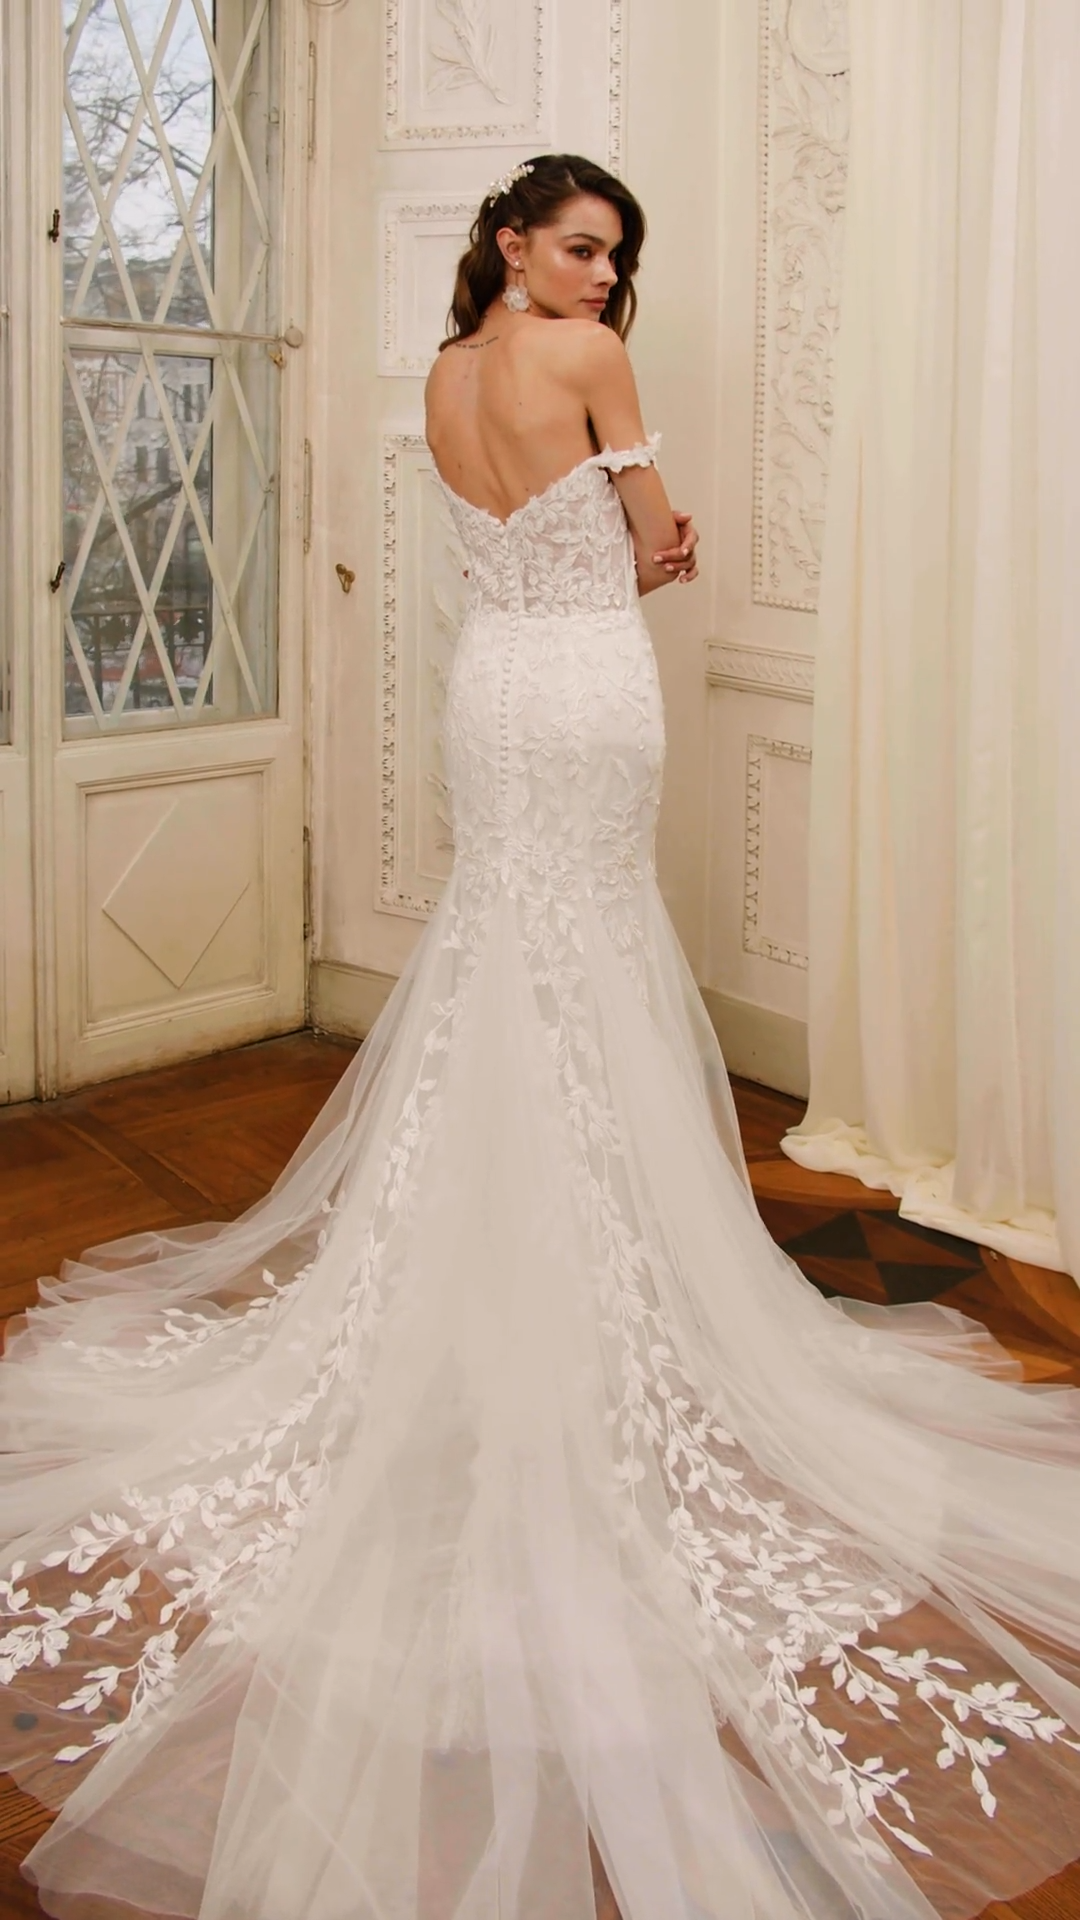 Moonlight Collection J6860 blush bridal gowns, ivory bridal gowns, white wedding dresses & more